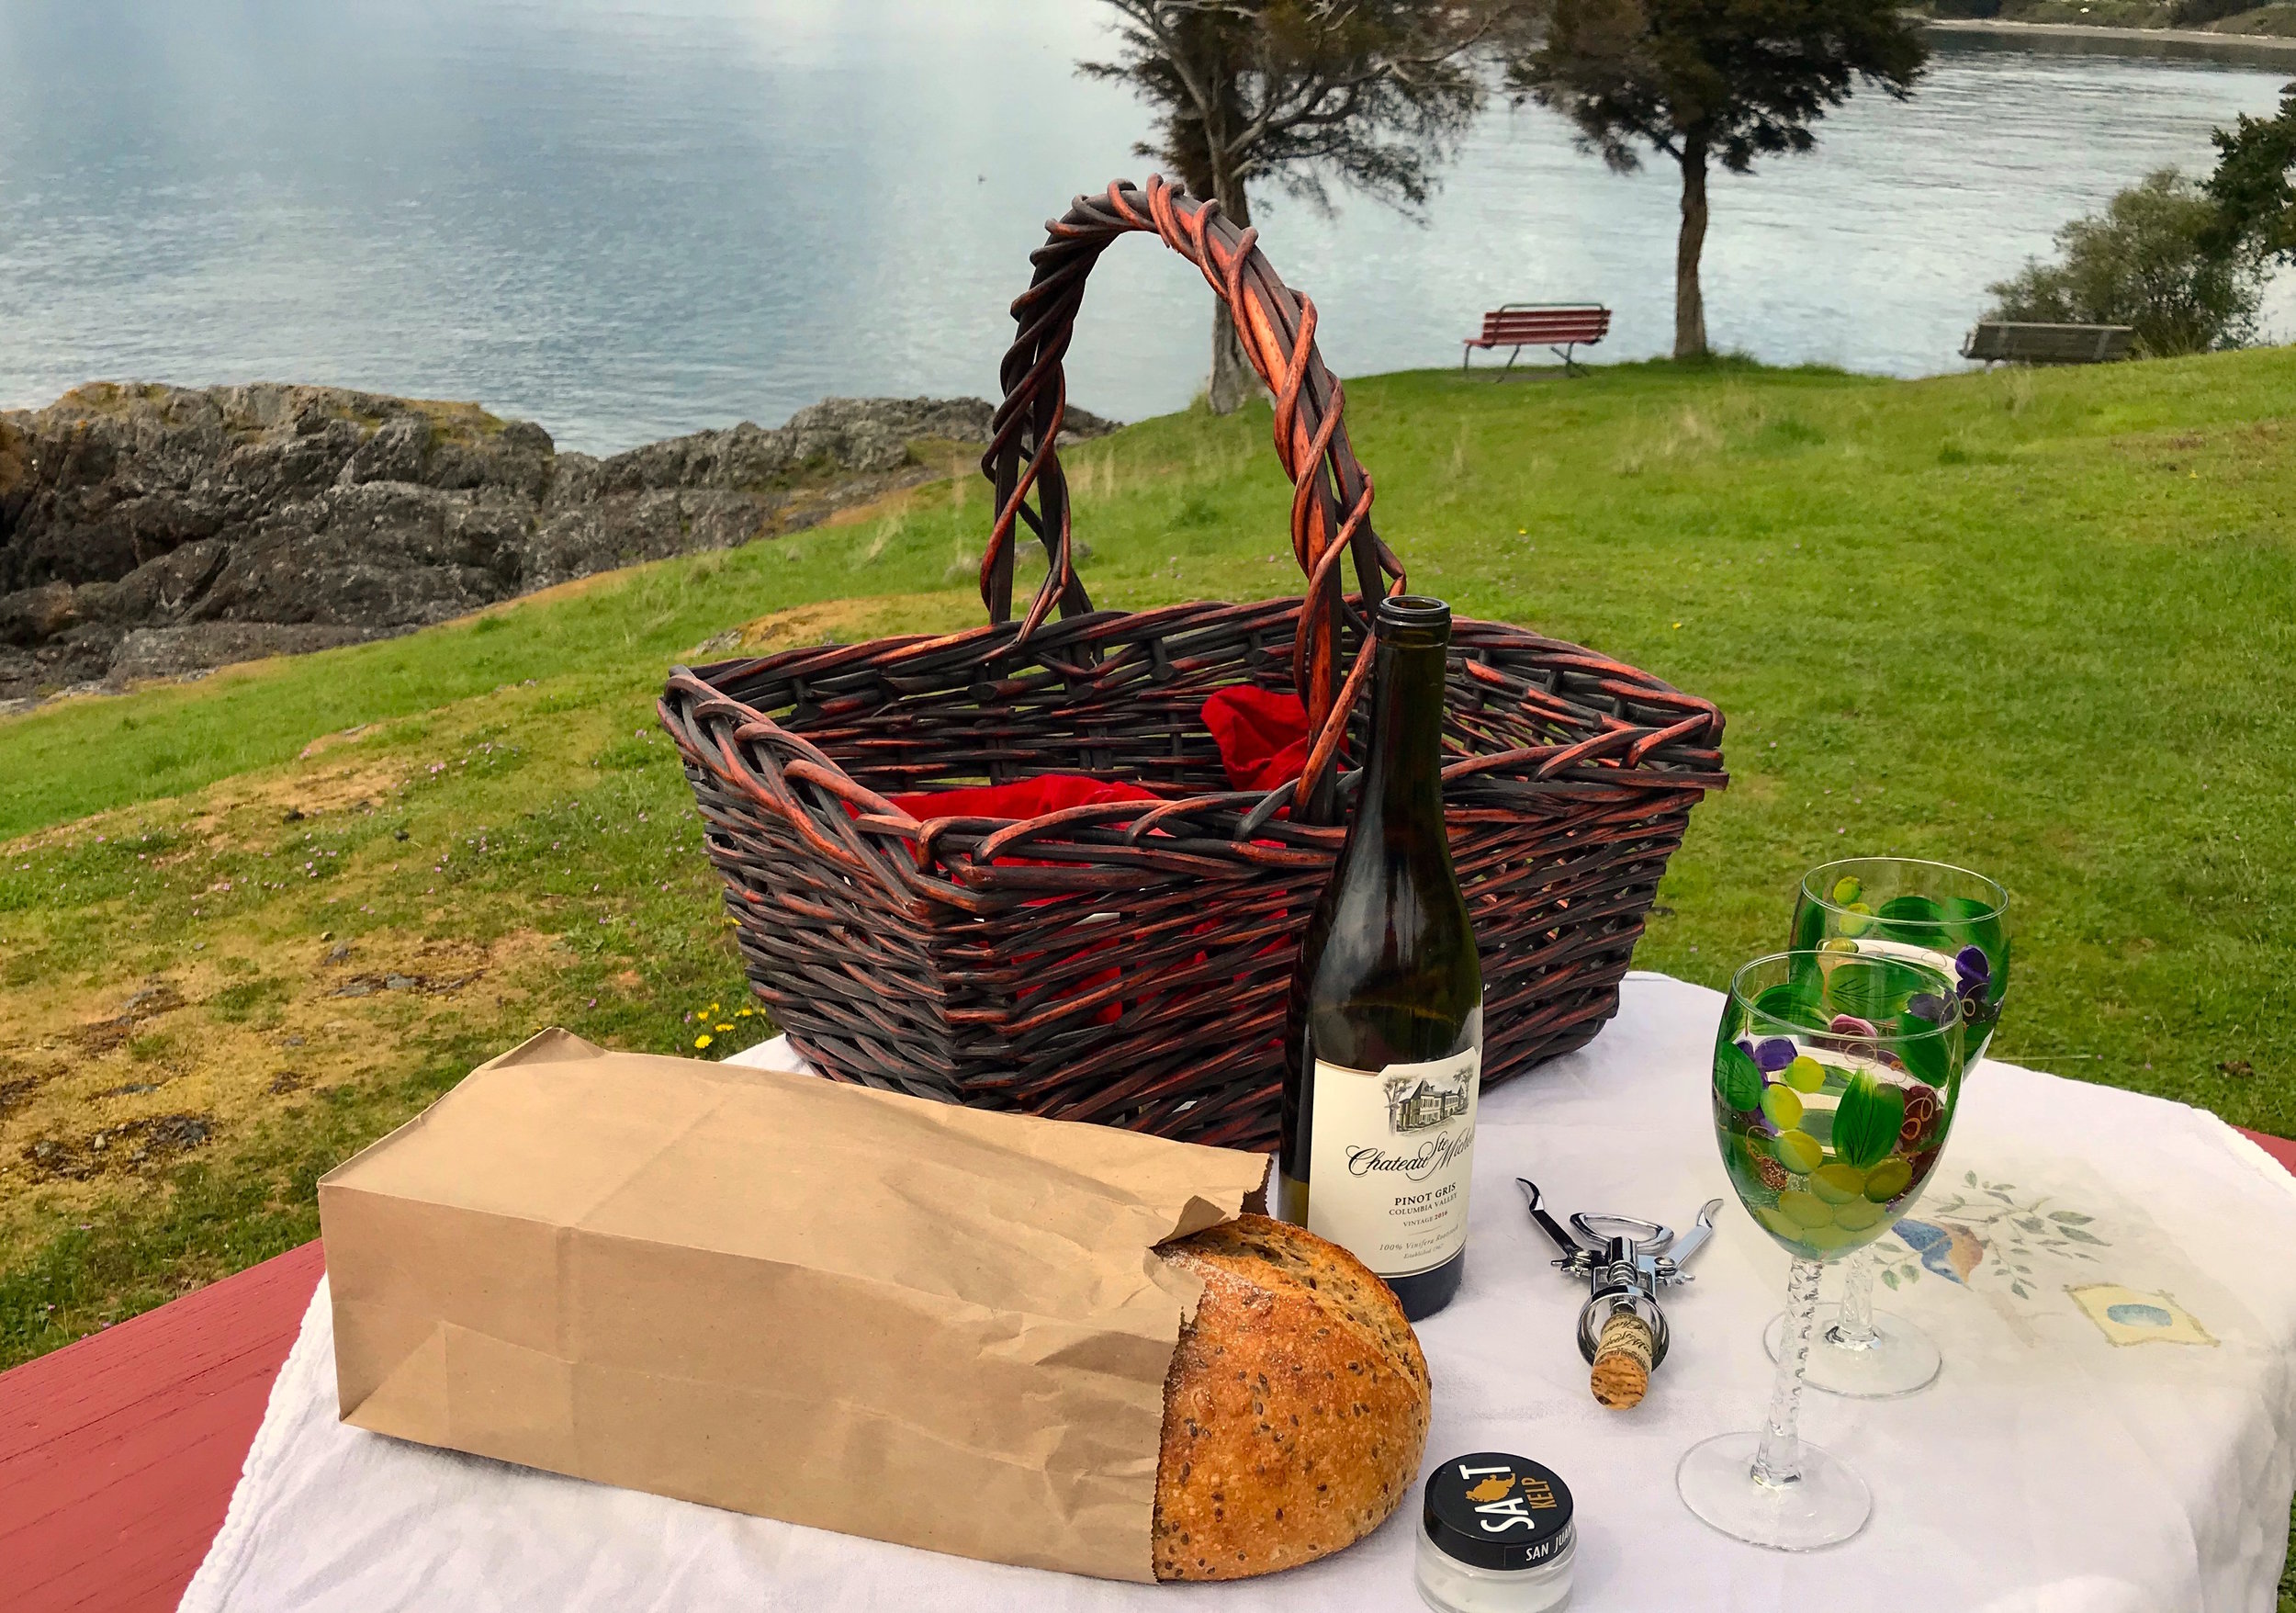 A picnic overlooking the Salish Sea is a lot more fun than going out